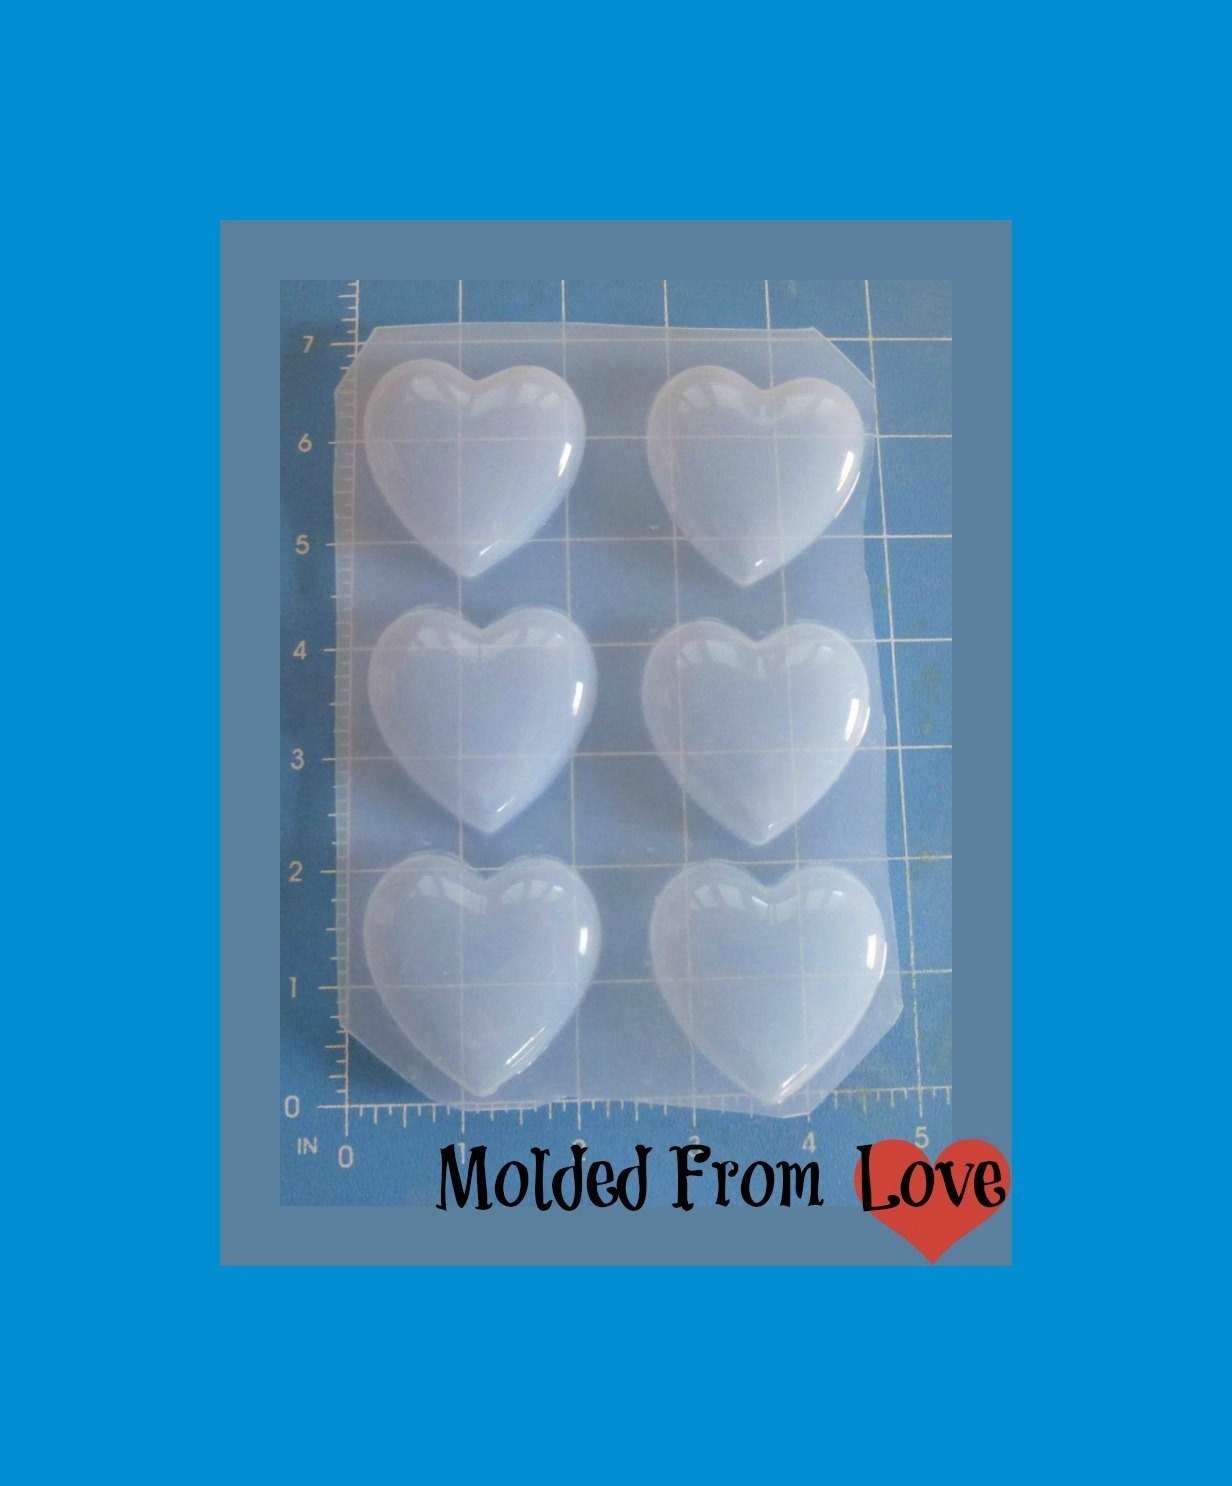 Large Bubble Barbie Heart Resin Mold Hearts Puffy Heart Flexible Plastic  Resin Molds Large Heart Chocolate Mold 